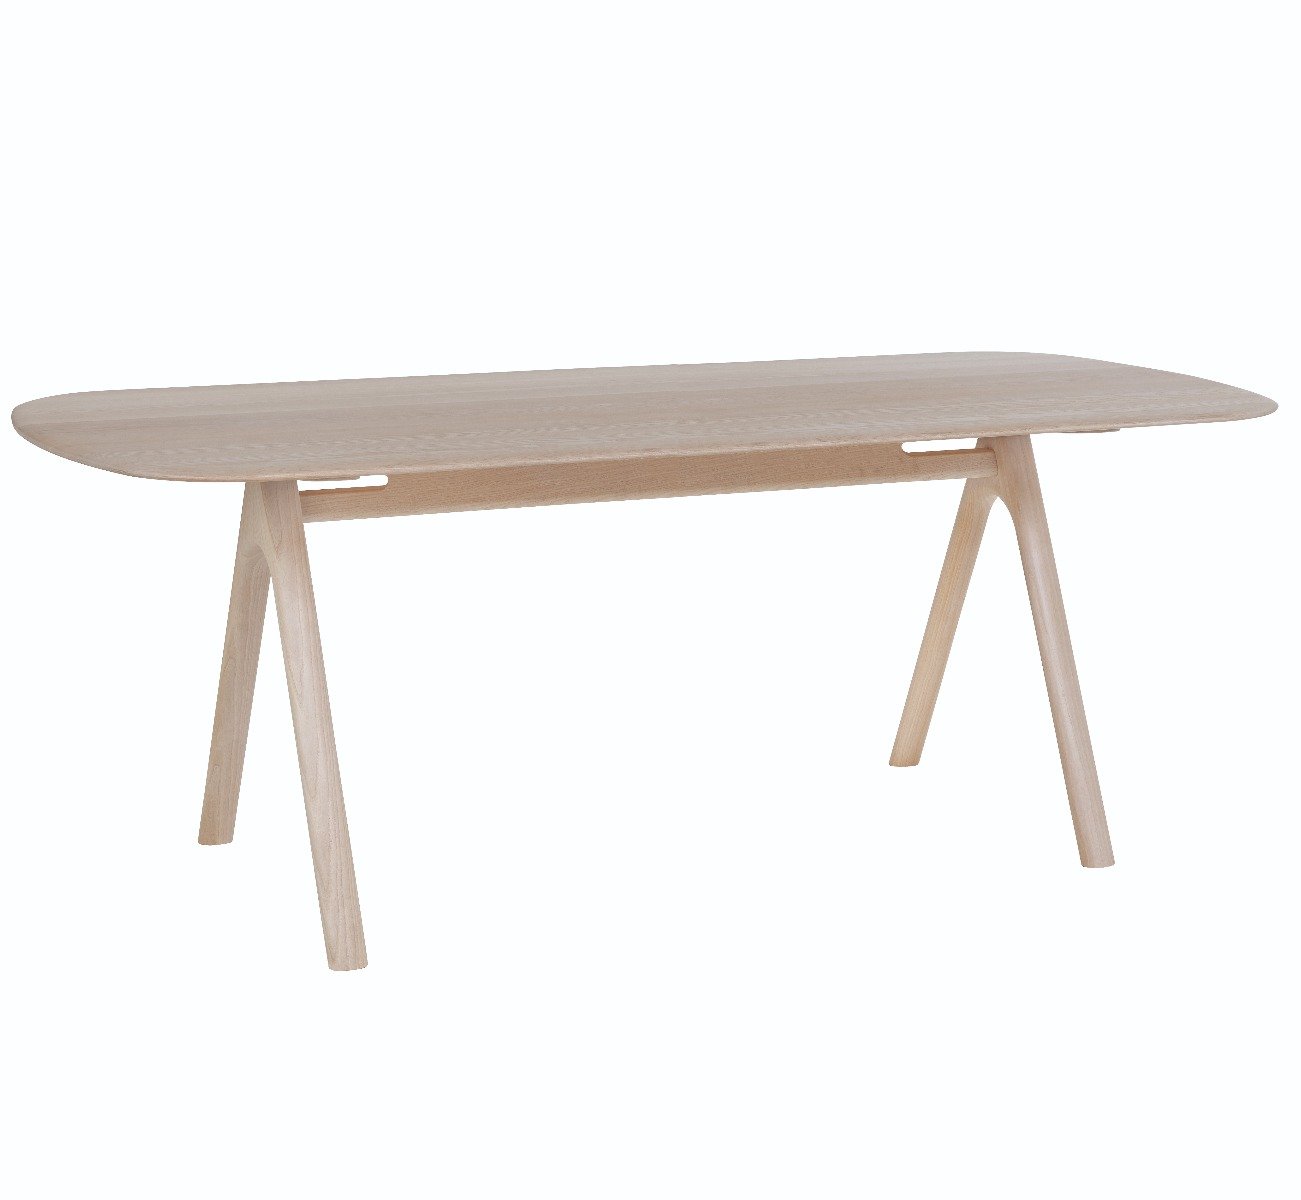 Ercol Corso Large Dining Table, Neutral | Barker & Stonehouse